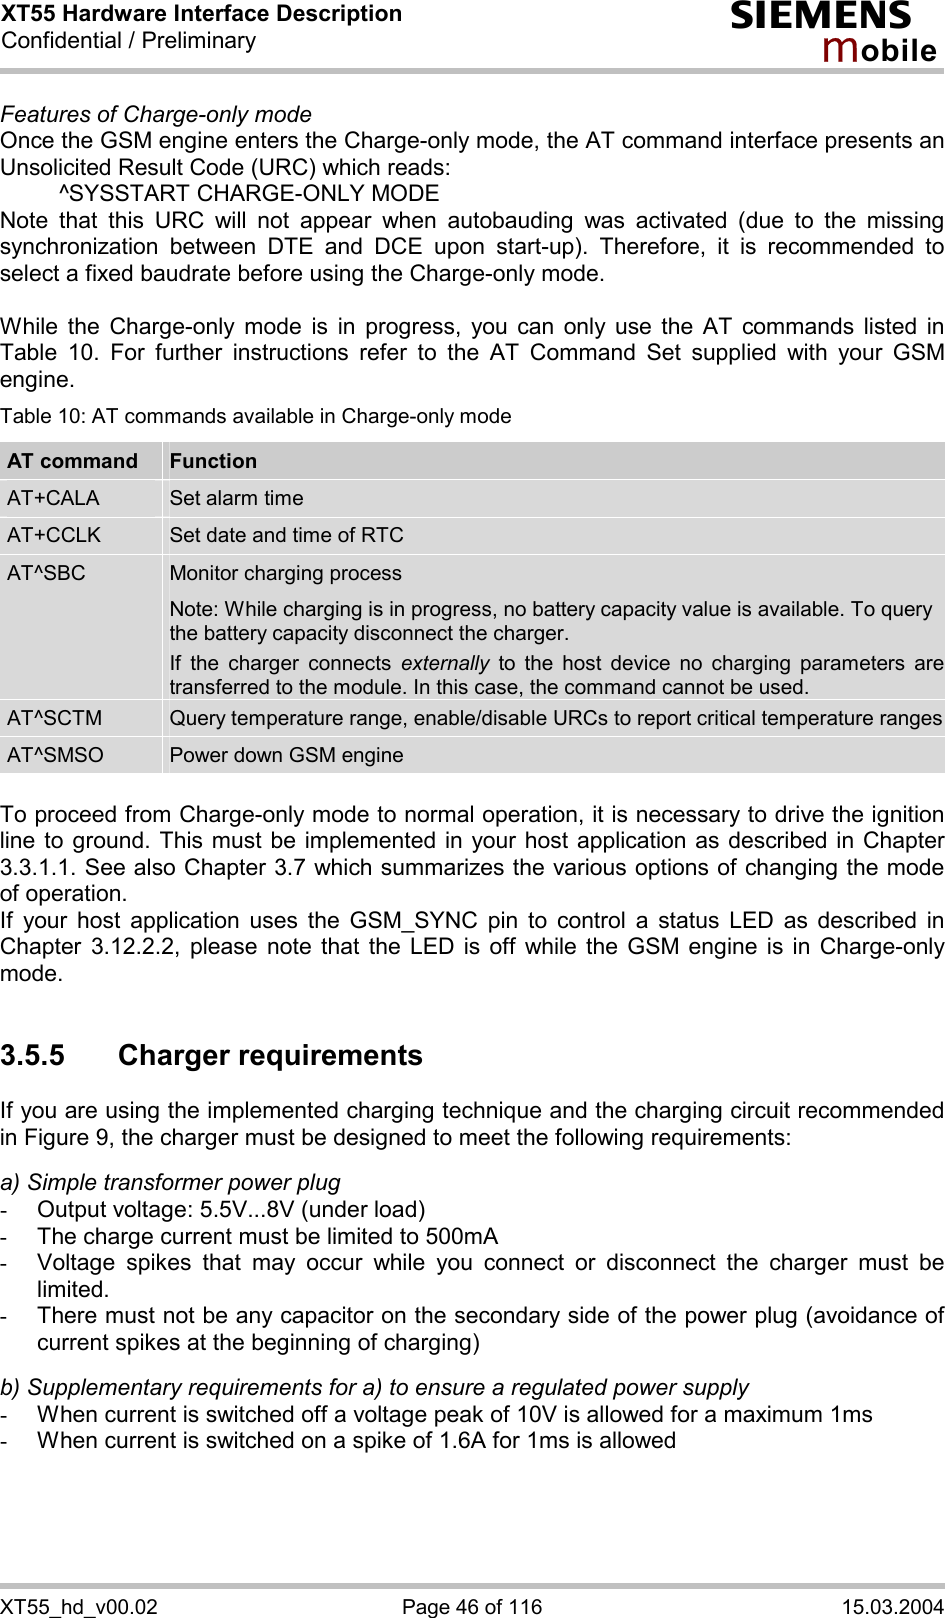 XT55 Hardware Interface Description Confidential / Preliminary s mo b i l e XT55_hd_v00.02  Page 46 of 116  15.03.2004 Features of Charge-only mode Once the GSM engine enters the Charge-only mode, the AT command interface presents an Unsolicited Result Code (URC) which reads:   ^SYSSTART CHARGE-ONLY MODE Note that this URC will not appear when autobauding was activated (due to the missing synchronization between DTE and DCE upon start-up). Therefore, it is recommended to select a fixed baudrate before using the Charge-only mode.  While the Charge-only mode is in progress, you can only use the AT commands listed in Table 10. For further instructions refer to the AT Command Set supplied with your GSM engine. Table 10: AT commands available in Charge-only mode AT command  Function AT+CALA  Set alarm time AT+CCLK  Set date and time of RTC AT^SBC  Monitor charging process Note: While charging is in progress, no battery capacity value is available. To query the battery capacity disconnect the charger.  If the charger connects externally to the host device no charging parameters are transferred to the module. In this case, the command cannot be used. AT^SCTM  Query temperature range, enable/disable URCs to report critical temperature rangesAT^SMSO  Power down GSM engine  To proceed from Charge-only mode to normal operation, it is necessary to drive the ignition line to ground. This must be implemented in your host application as described in Chapter 3.3.1.1. See also Chapter 3.7 which summarizes the various options of changing the mode of operation. If your host application uses the GSM_SYNC pin to control a status LED as described in Chapter 3.12.2.2, please note that the LED is off while the GSM engine is in Charge-only mode.  3.5.5 Charger requirements If you are using the implemented charging technique and the charging circuit recommended in Figure 9, the charger must be designed to meet the following requirements:   a) Simple transformer power plug -  Output voltage: 5.5V...8V (under load) -  The charge current must be limited to 500mA -  Voltage spikes that may occur while you connect or disconnect the charger must be limited. -  There must not be any capacitor on the secondary side of the power plug (avoidance of current spikes at the beginning of charging)  b) Supplementary requirements for a) to ensure a regulated power supply  -  When current is switched off a voltage peak of 10V is allowed for a maximum 1ms -  When current is switched on a spike of 1.6A for 1ms is allowed  